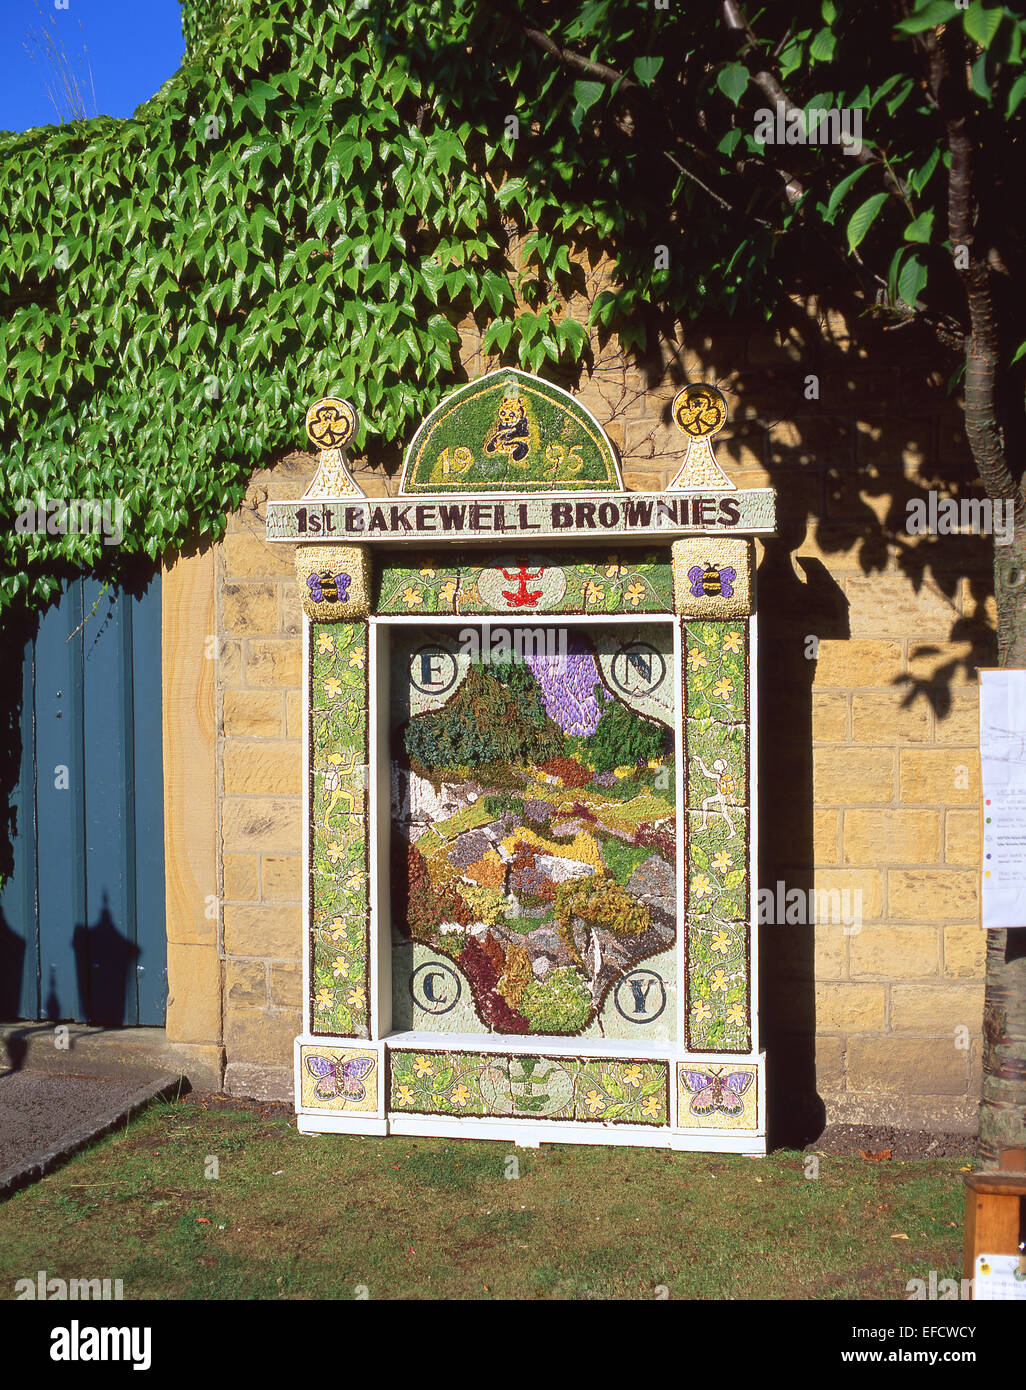 Bien s'habiller, Brownies Bakewell Rutland Square, Bakewell, Derbyshire, Angleterre, Royaume-Uni Banque D'Images